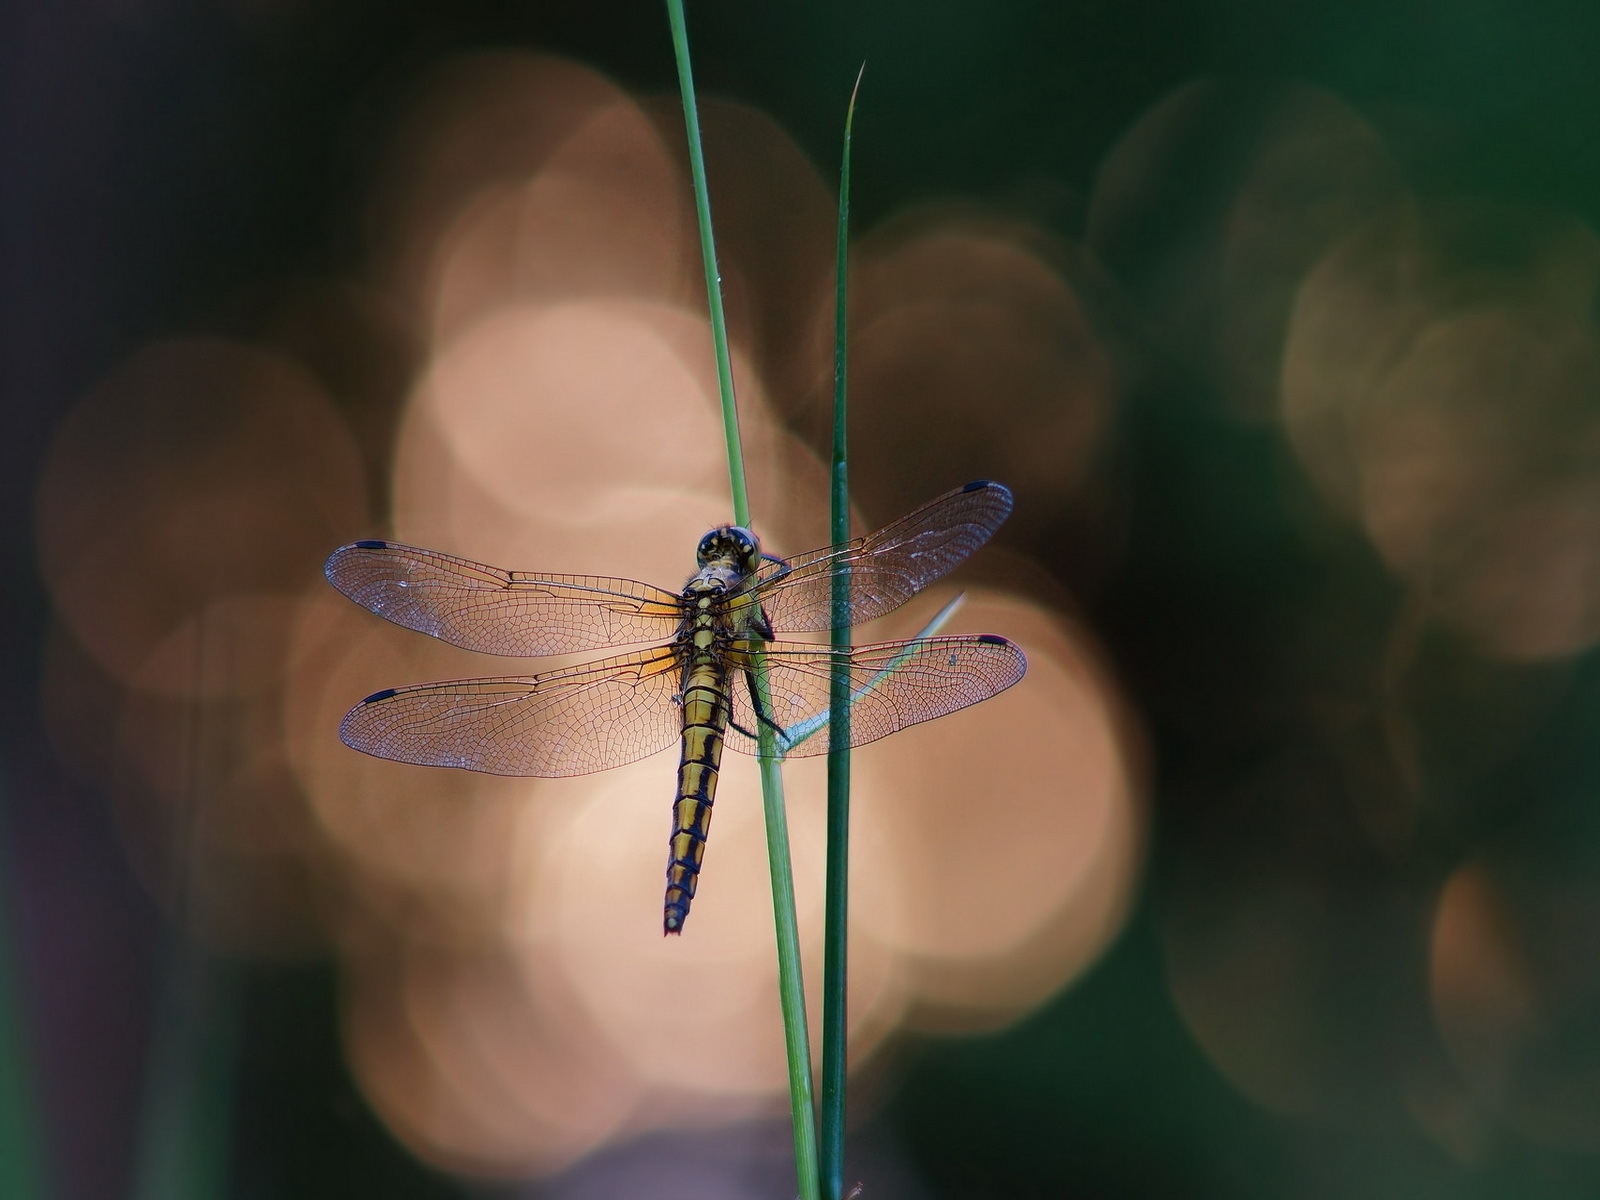 Blue Dragonfly on a Blade of Grass for 1600 x 1200 resolution